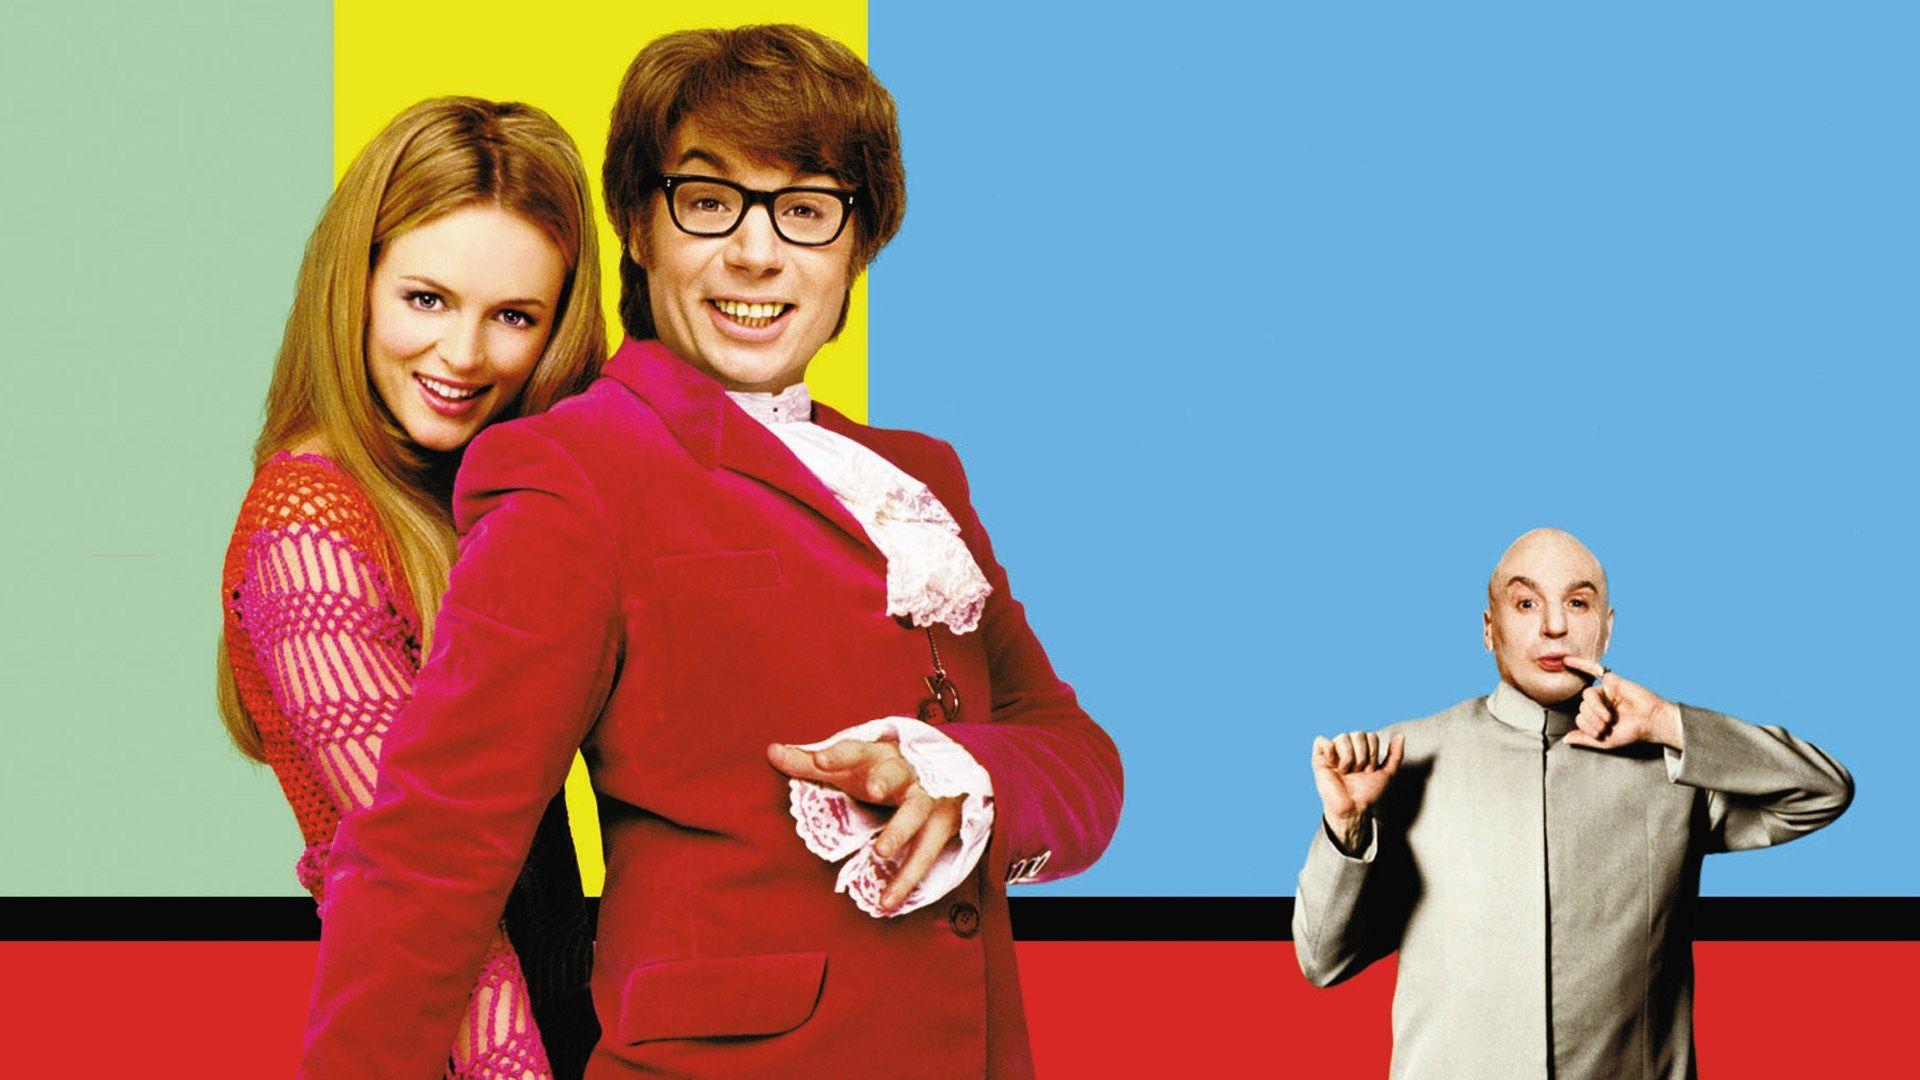 Austin Powers The Spy Who Shagged Me Movie Wallpapers